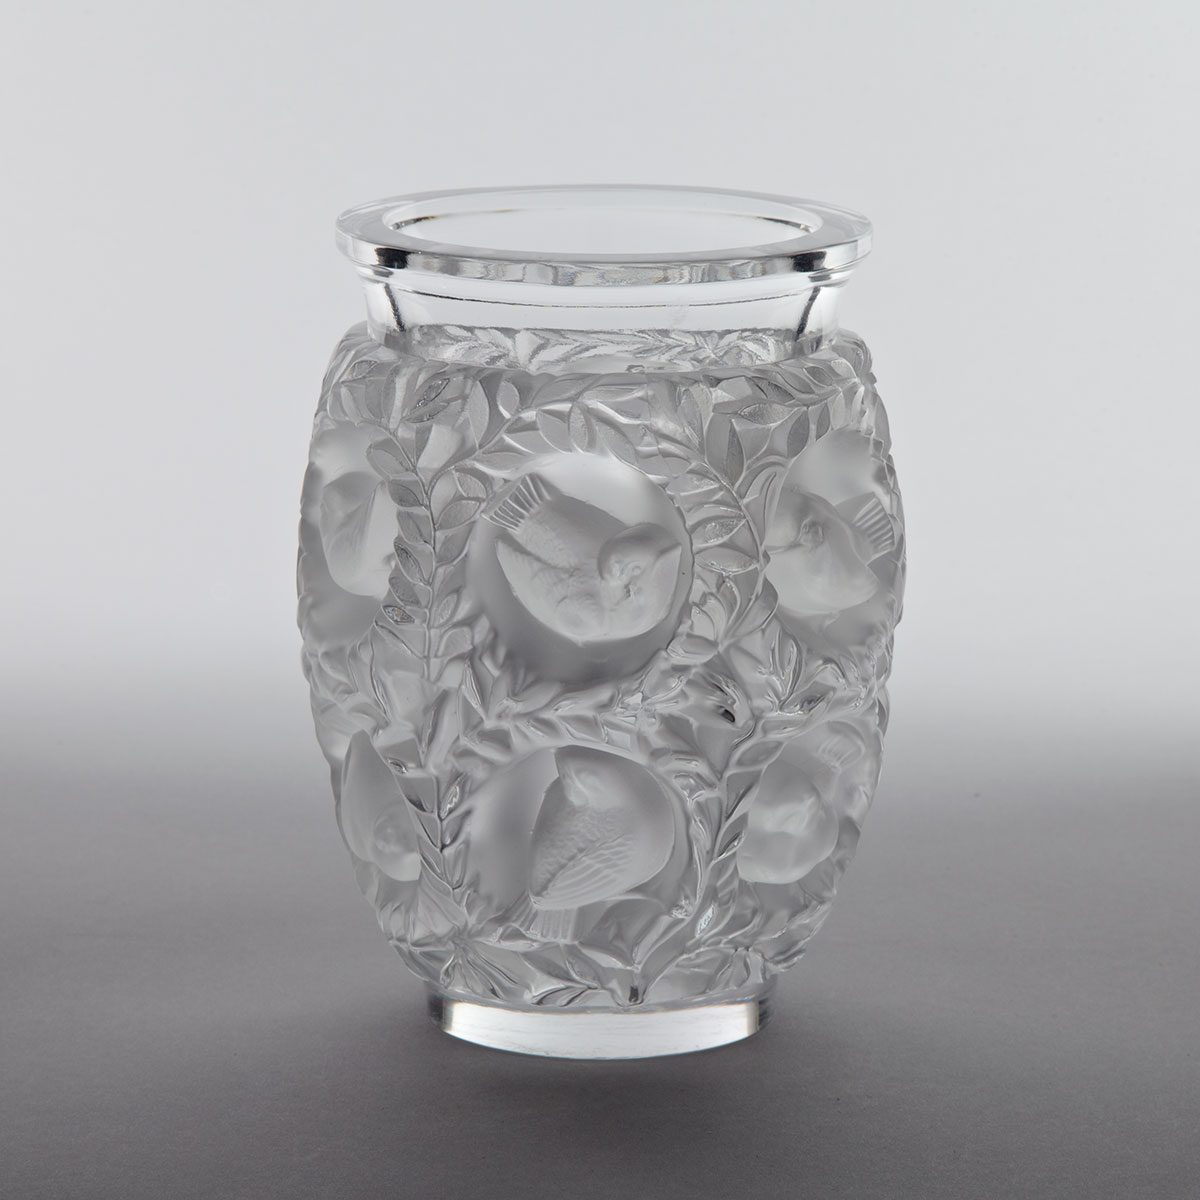 ‘Bagatelle’, Lalique Moulded and Partly Frosted Glass Vase, post-1945